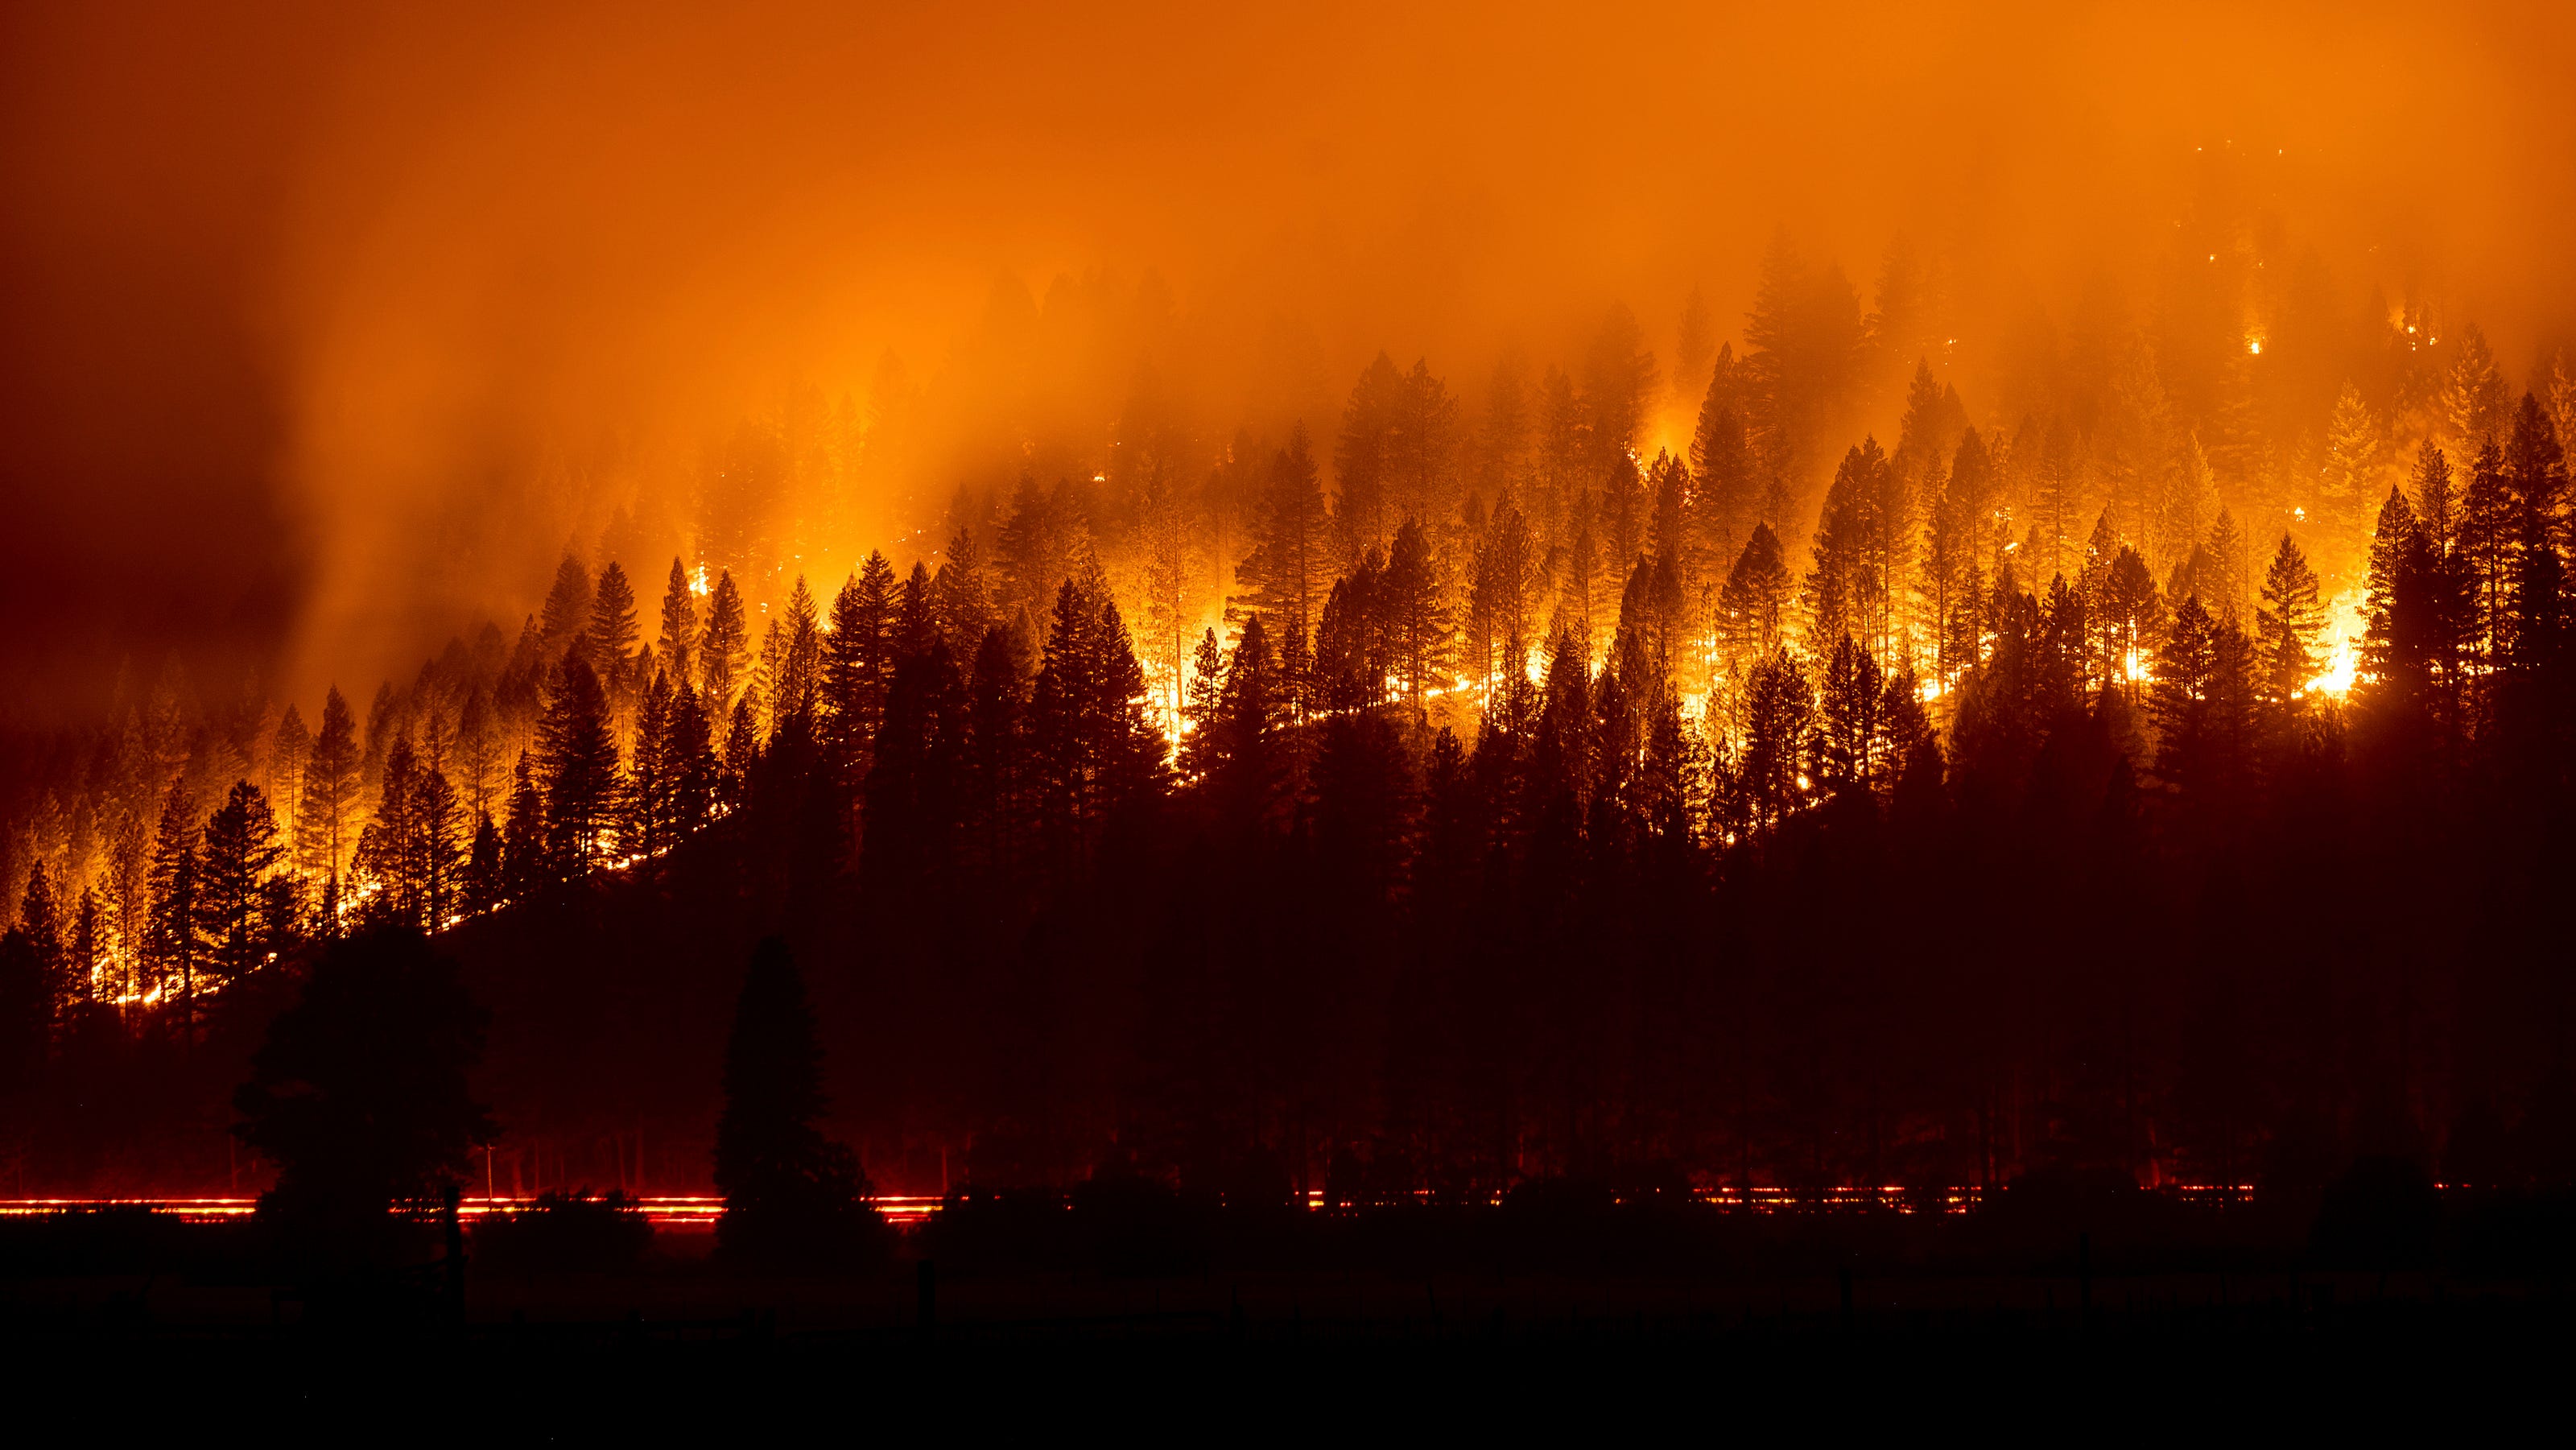 Northern California fires burn 820,000 acres, thousands still evacuated